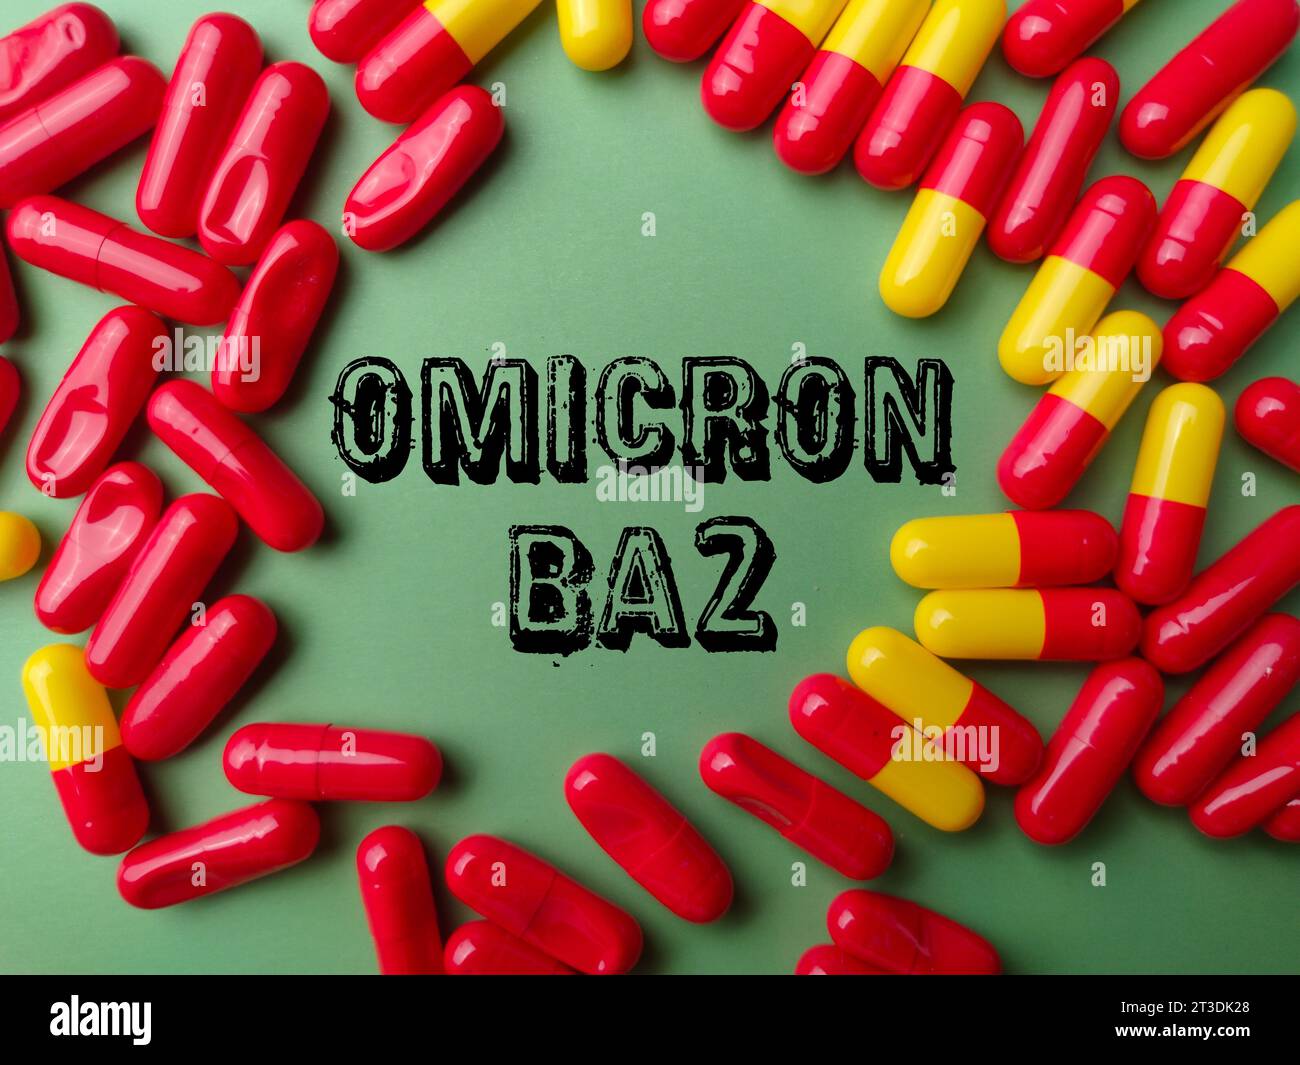 Top view medical pill with text OMICRON BA 2 on a green background. Stock Photo